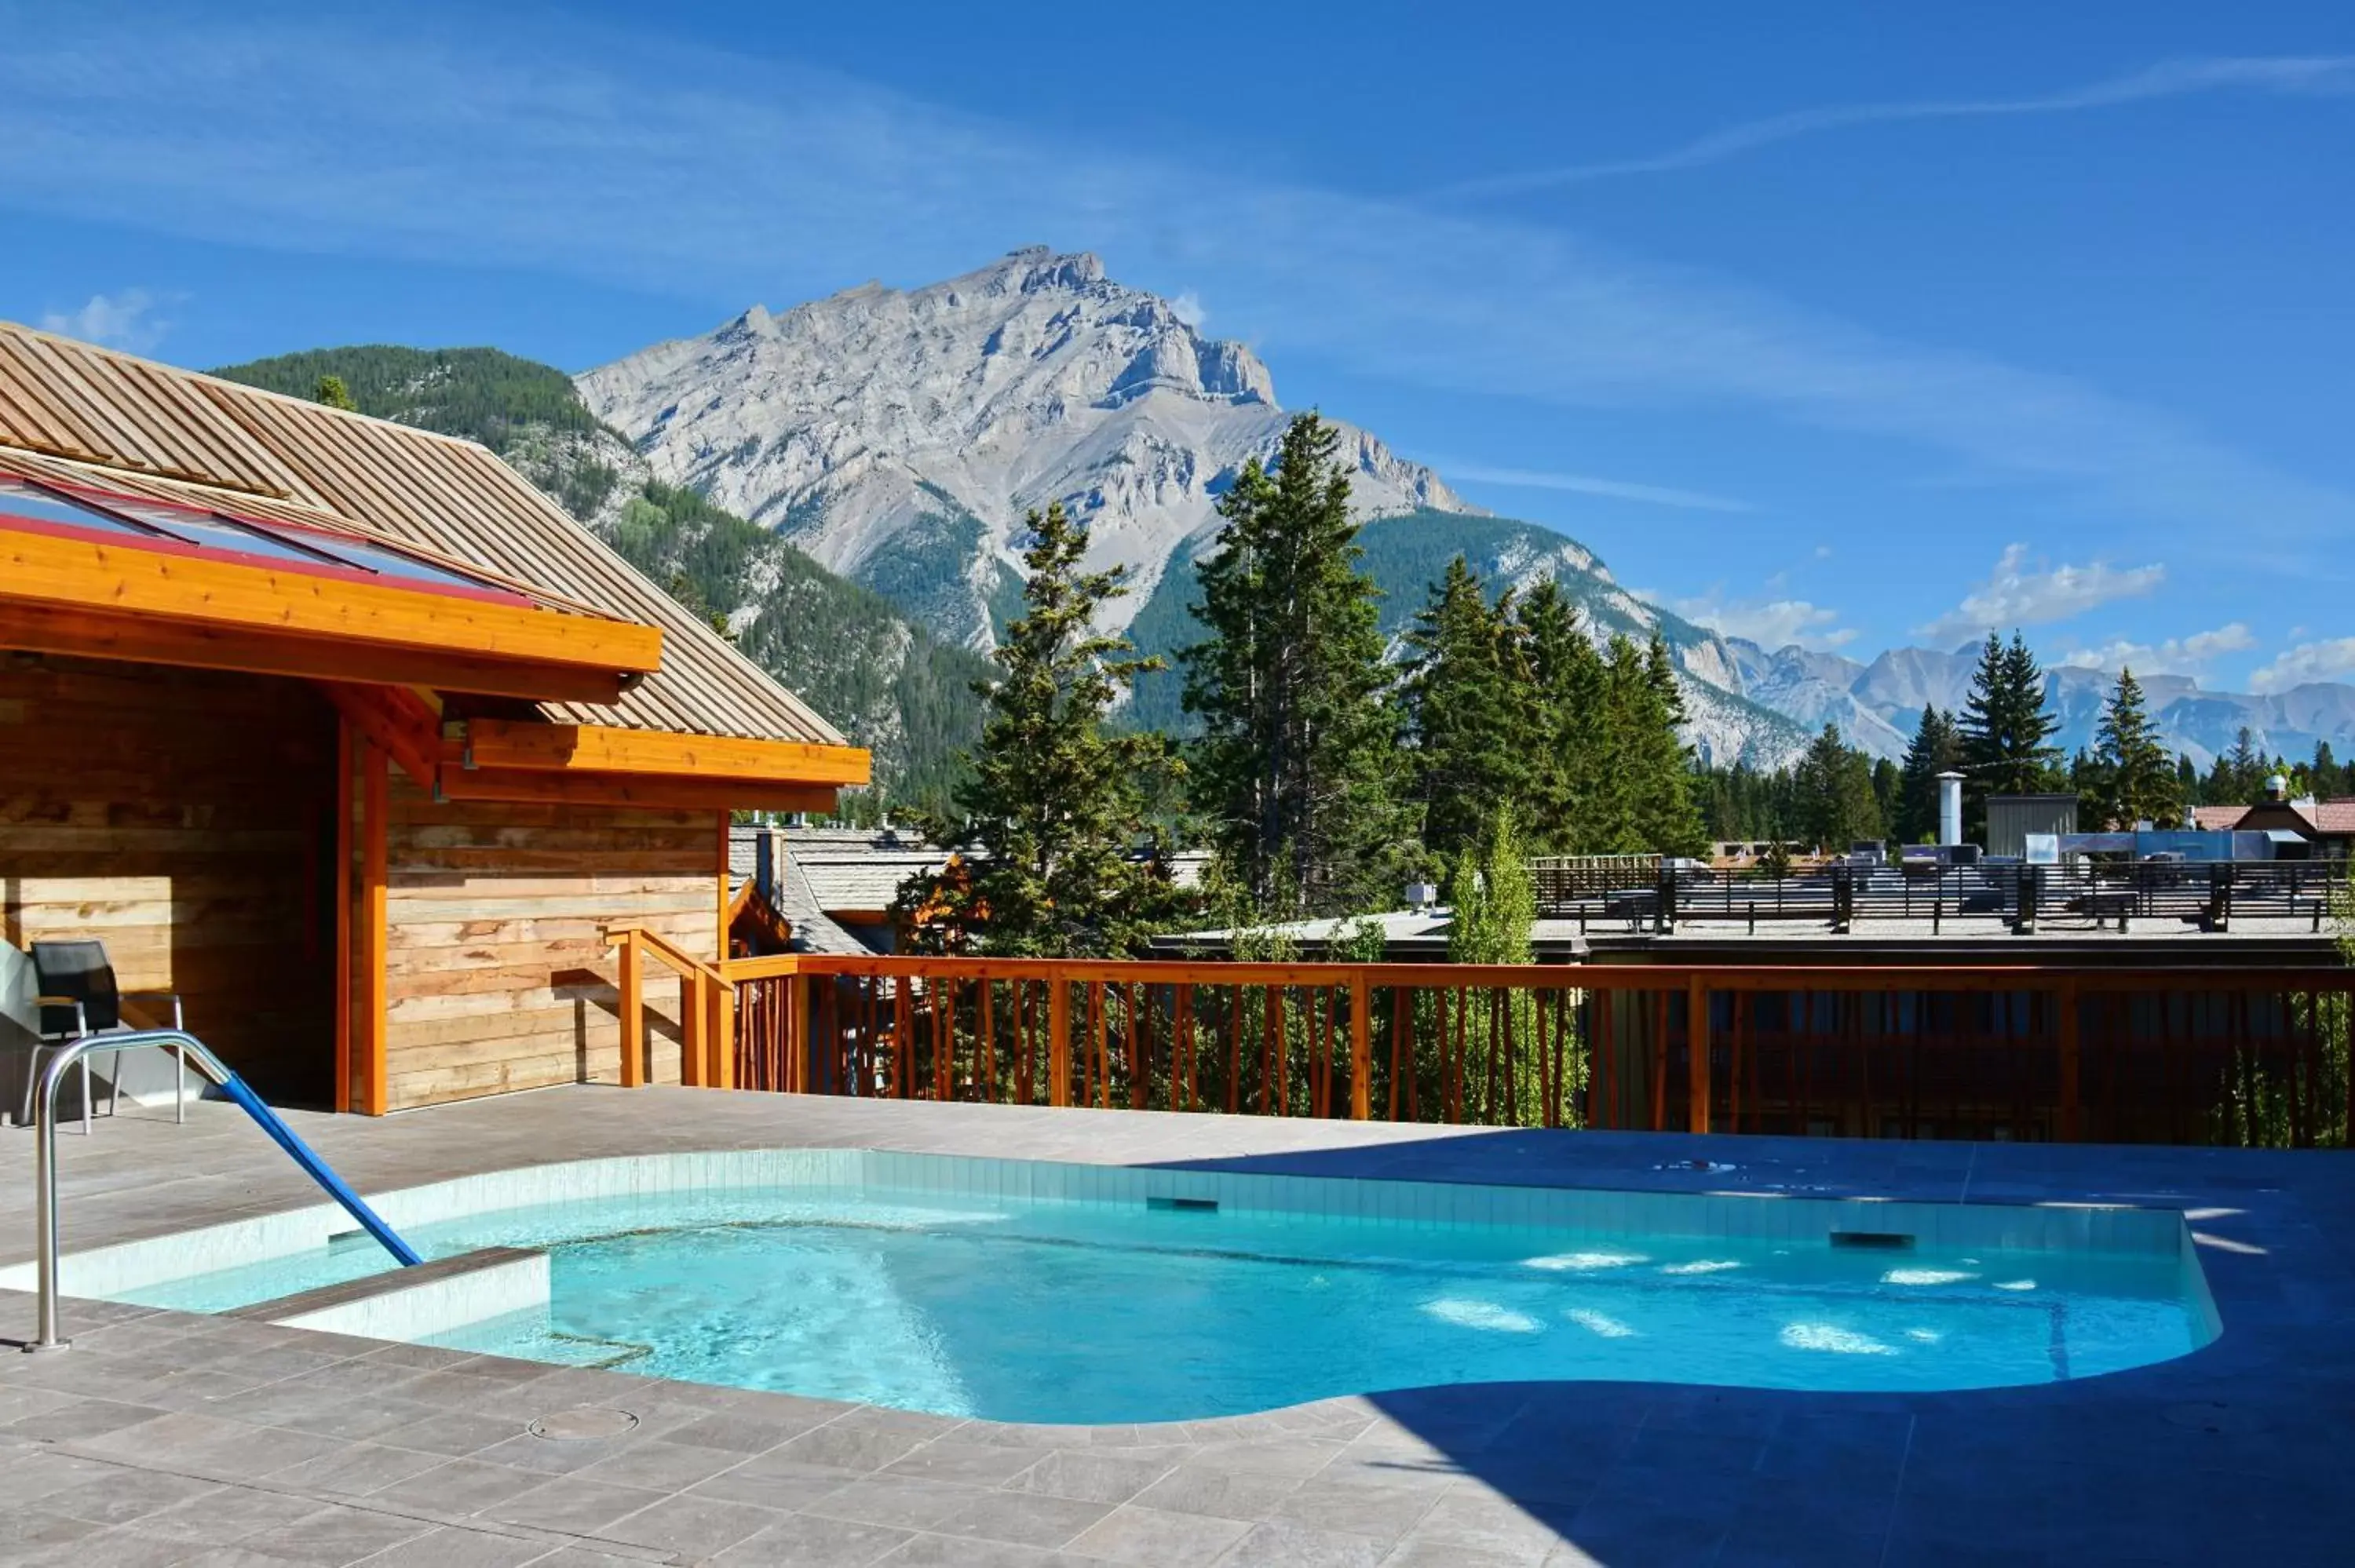 Hot Tub, Property Building in Moose Hotel and Suites